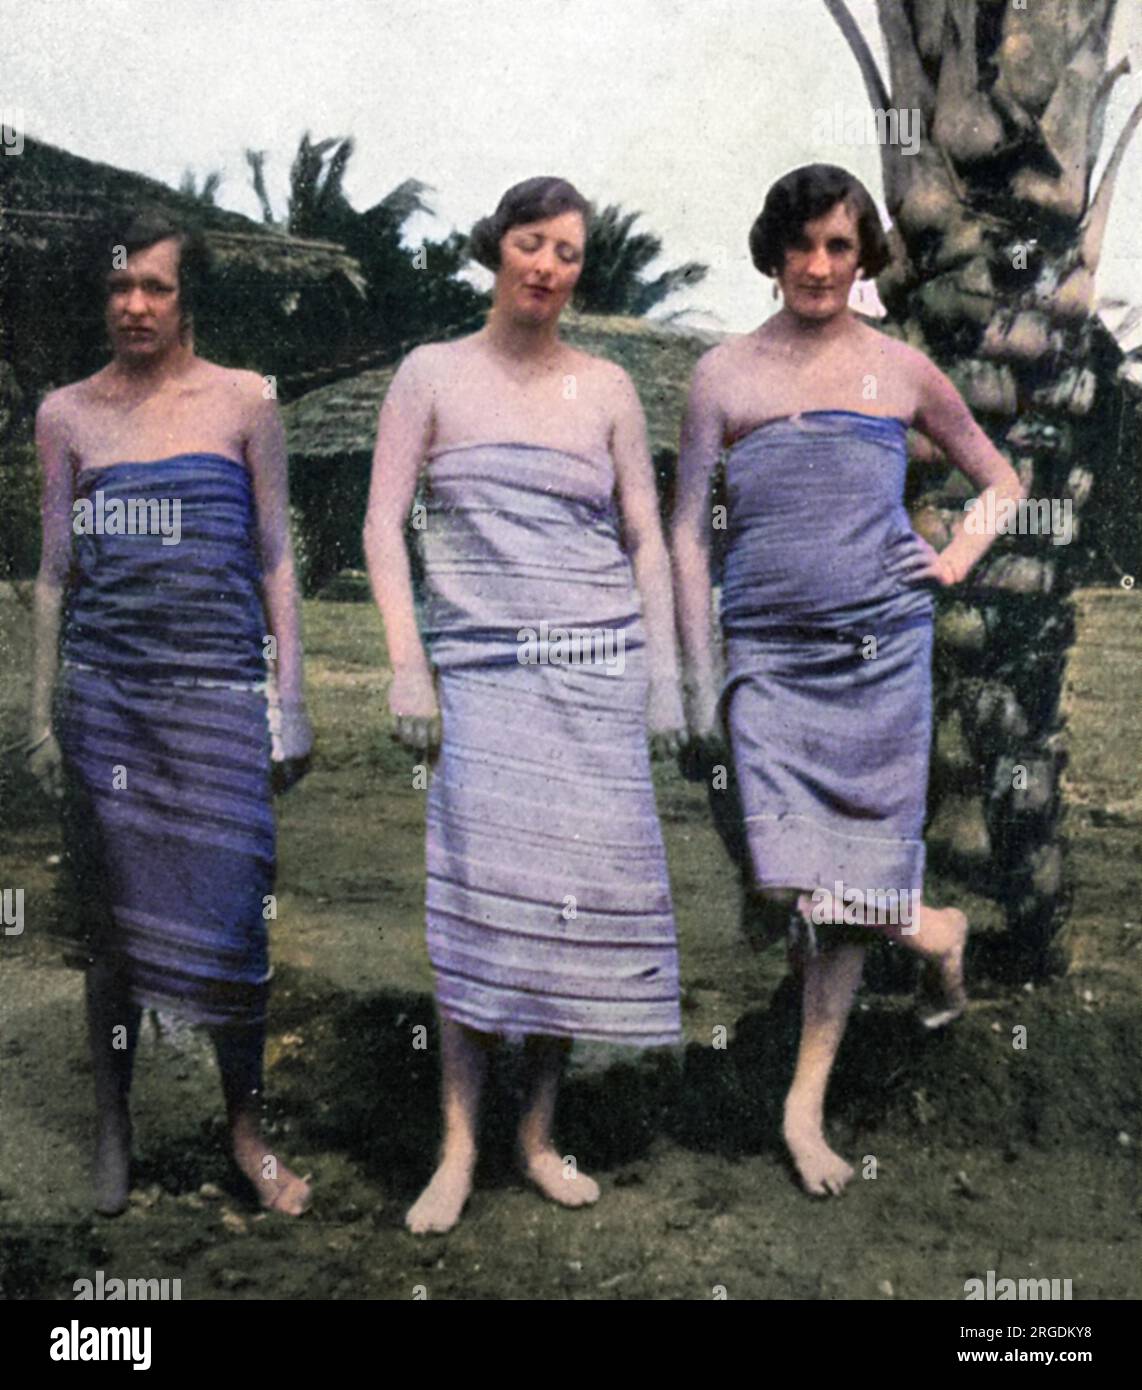 Lady Idina Hay (nee Sackville), pictured in a sarong or kanga with two friends in Kenya during the 1920s, while she was married to Josslyn Hay, Earl of Erroll.  On the left is the Countess N. de Graevenitz and on the right, Mrs. M. Roberts, both similarly attired.  Five-times married Idina would gain notoriety as part of the Happy Valley Set when she moved to Kenya in 1924 with her third husband, Josslyn Hay, Earl of Errol. With her serial marriages and reputation for debauched decadence, she inspired the character of 'The Bolter' in Nancy Mitford's novels, The Pursuit of Love and Love in a Co Stock Photo